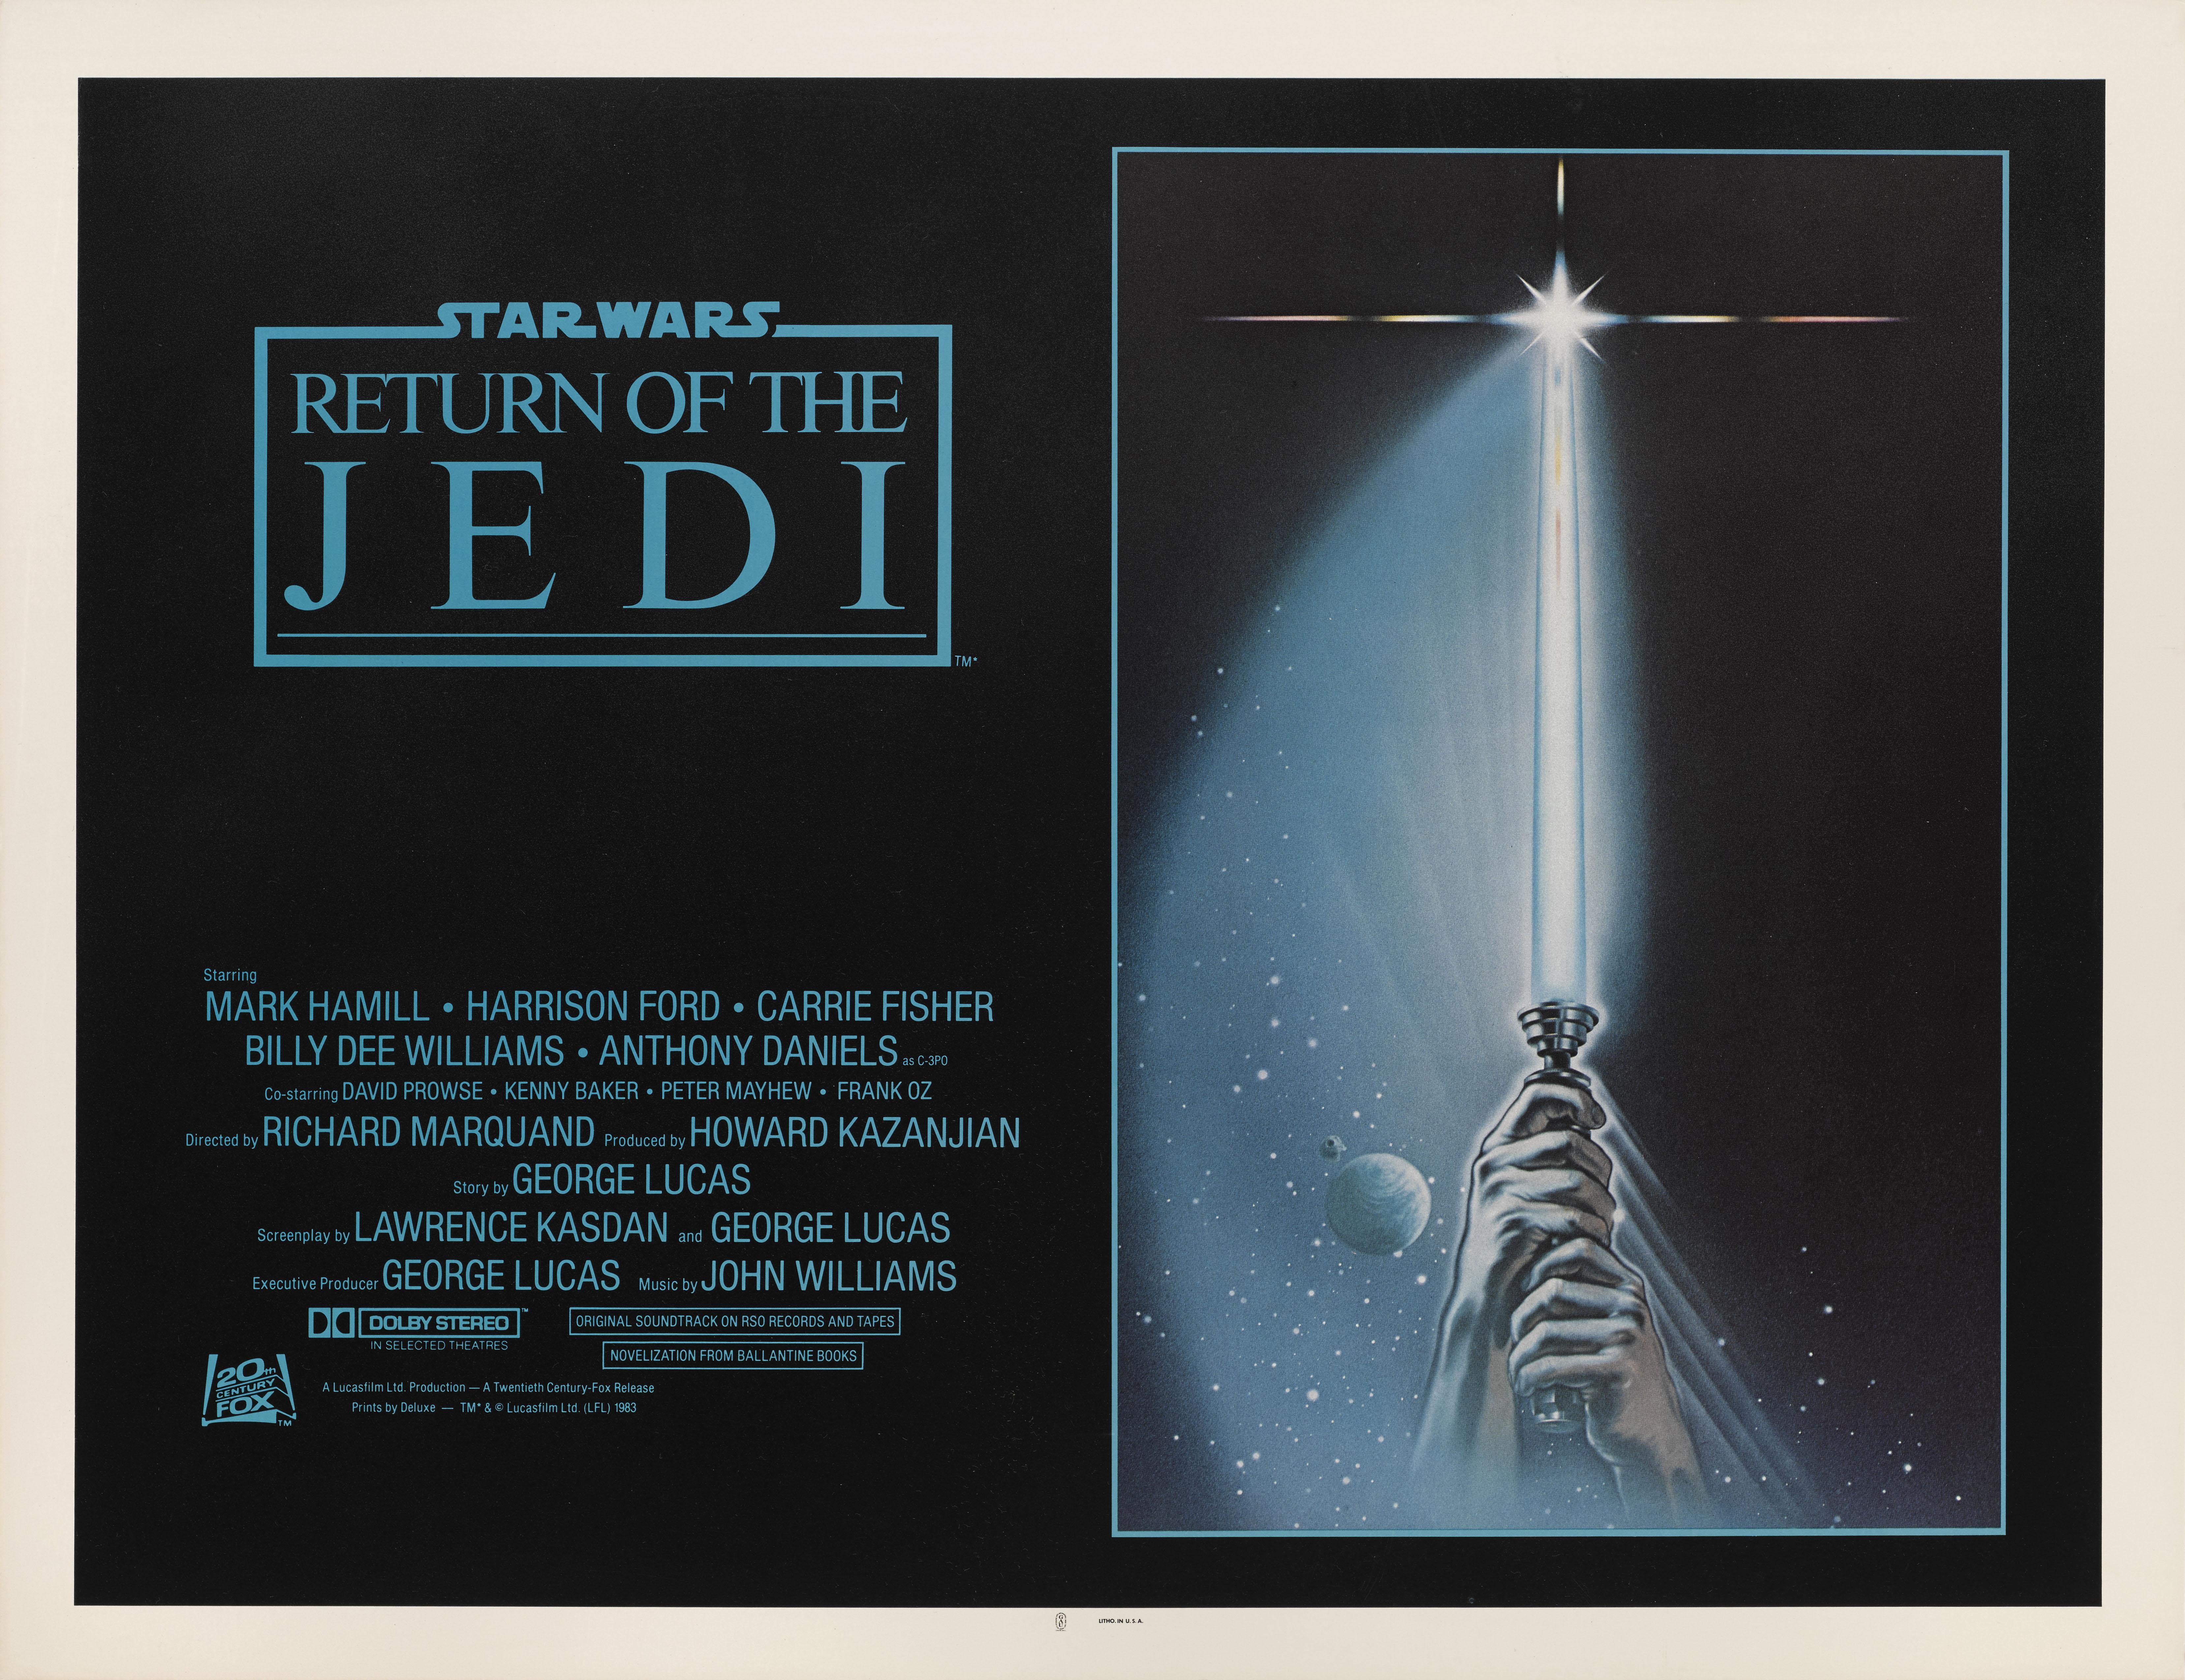 Original US film poster for the 1983 Third Star Wars film. Staring Mark Hamill, Harrison Ford, Carrie Fisher. The Art work is Tim Reamer (dates unknown) This in near mint condition unfolded and conservation paper backed. It would be shipped in a